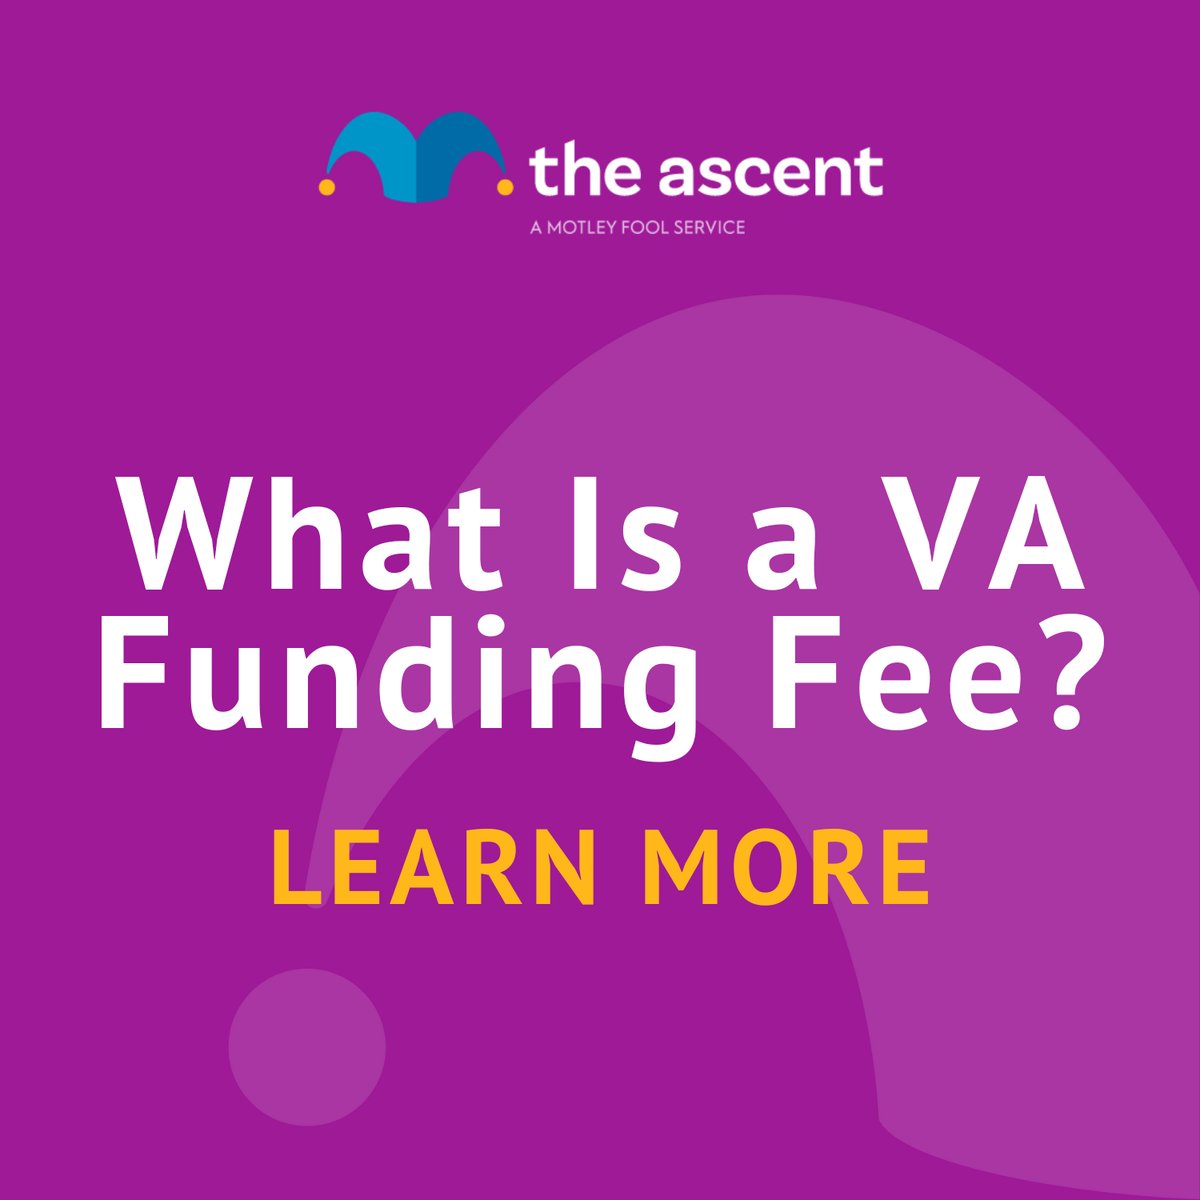 VA Funding Fees Everything You Need to Know The Motley Fool